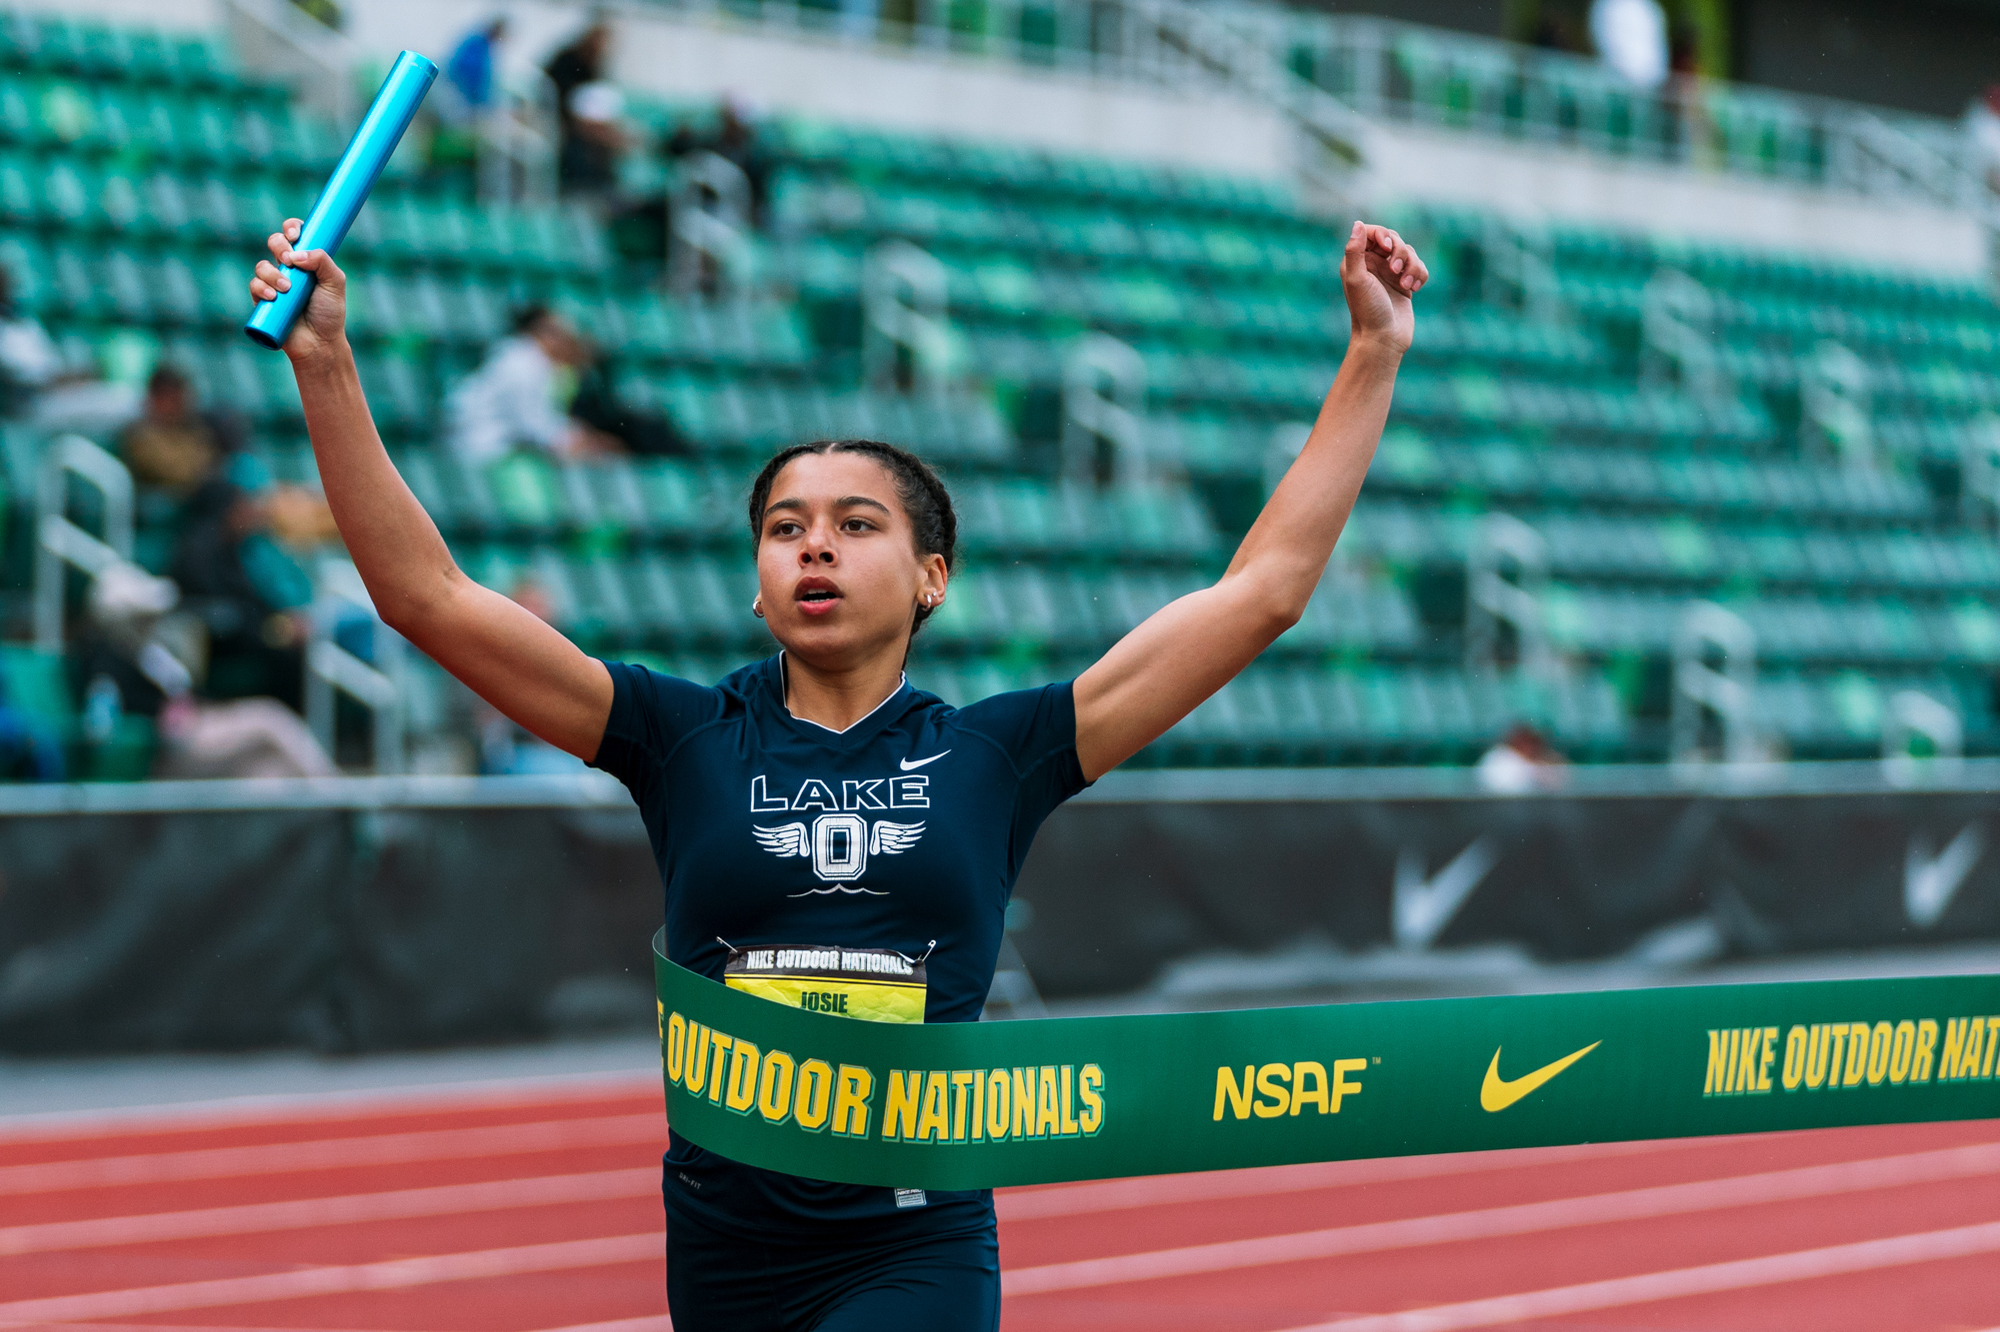 Lake Oswego girls take gold in the with another new state record at Nike Outdoor Nationals -